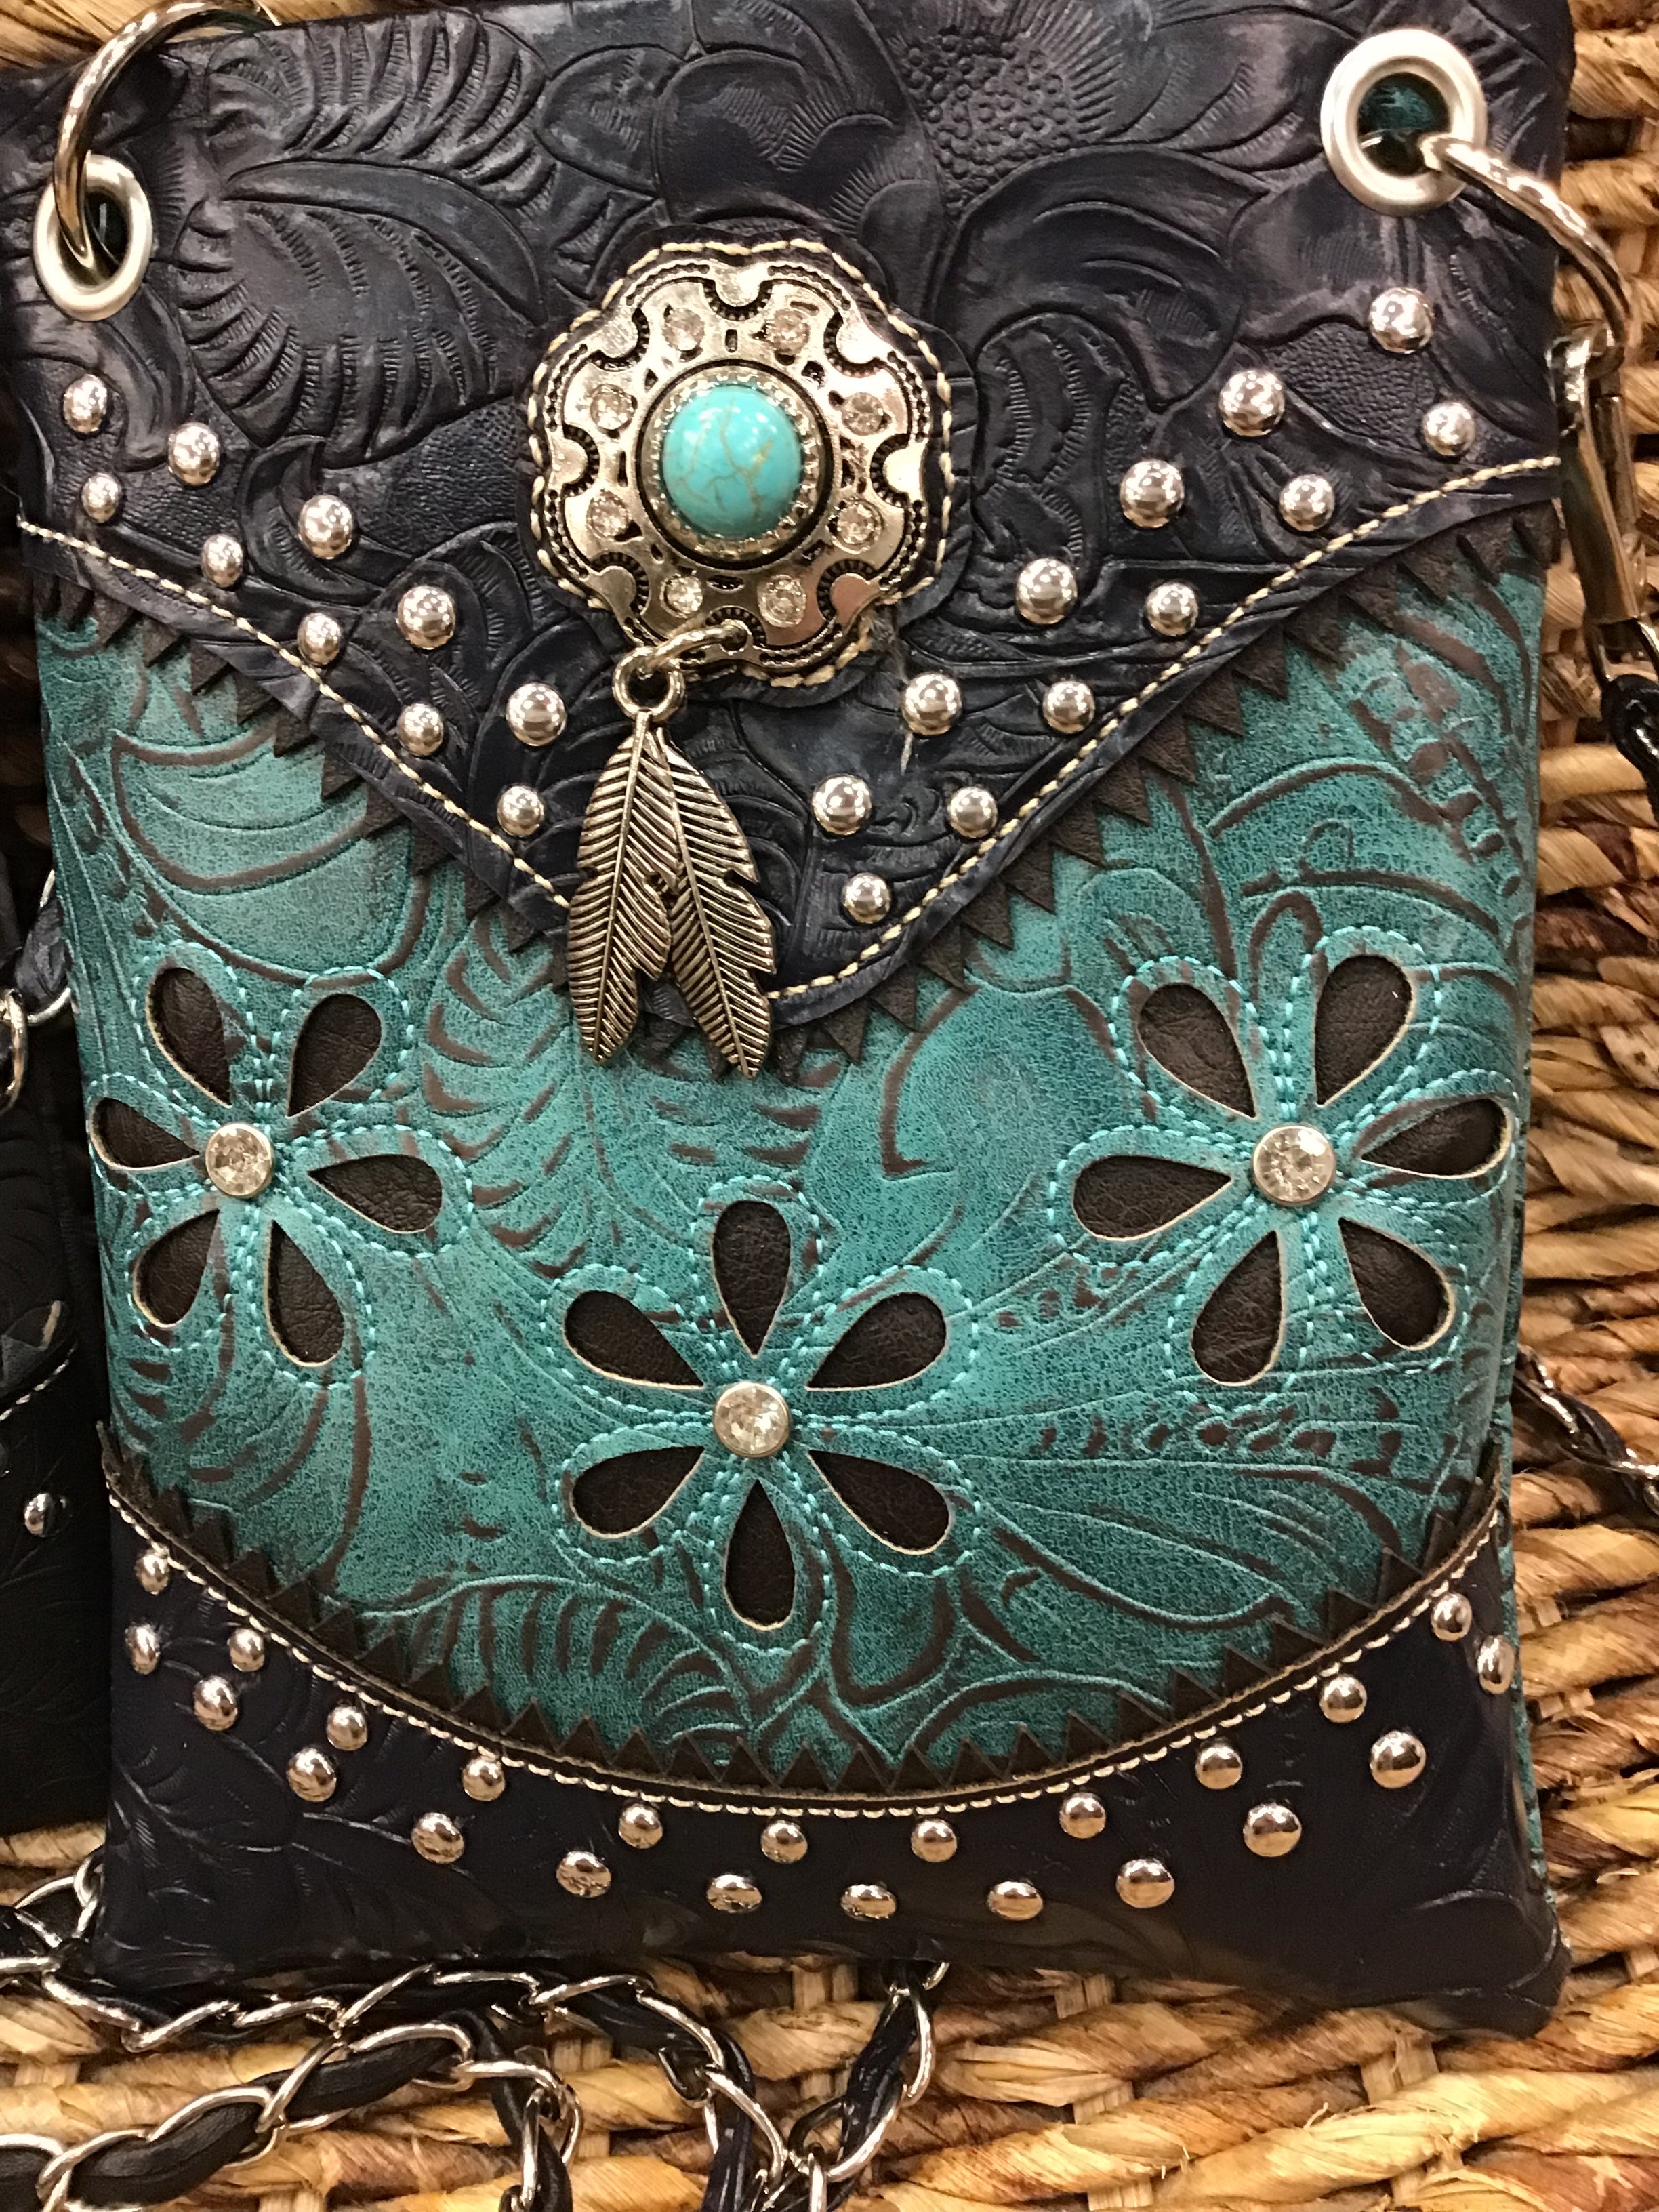 Crossbody Purse with Tooling and Decorative Feathers